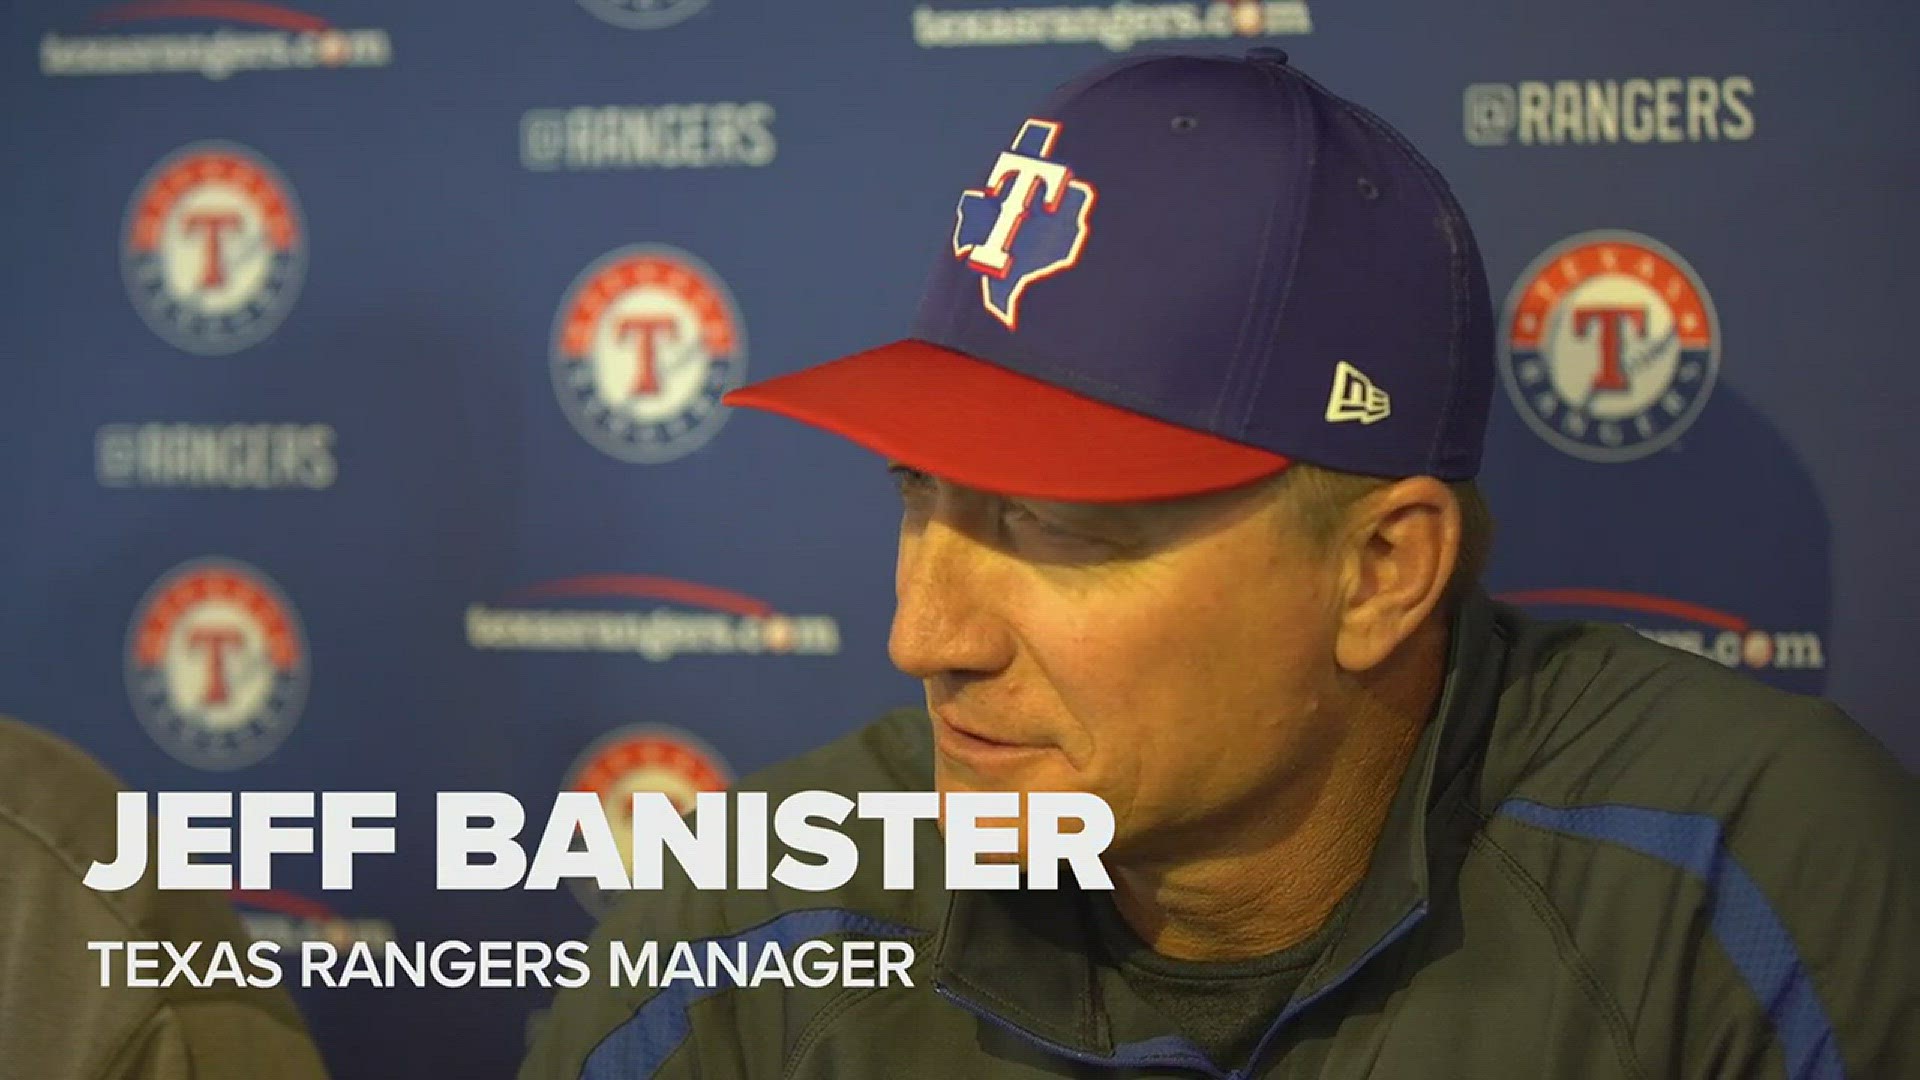 Jeff Banister weighs in on the expectations for the 2018 Rangers. WFAA.com